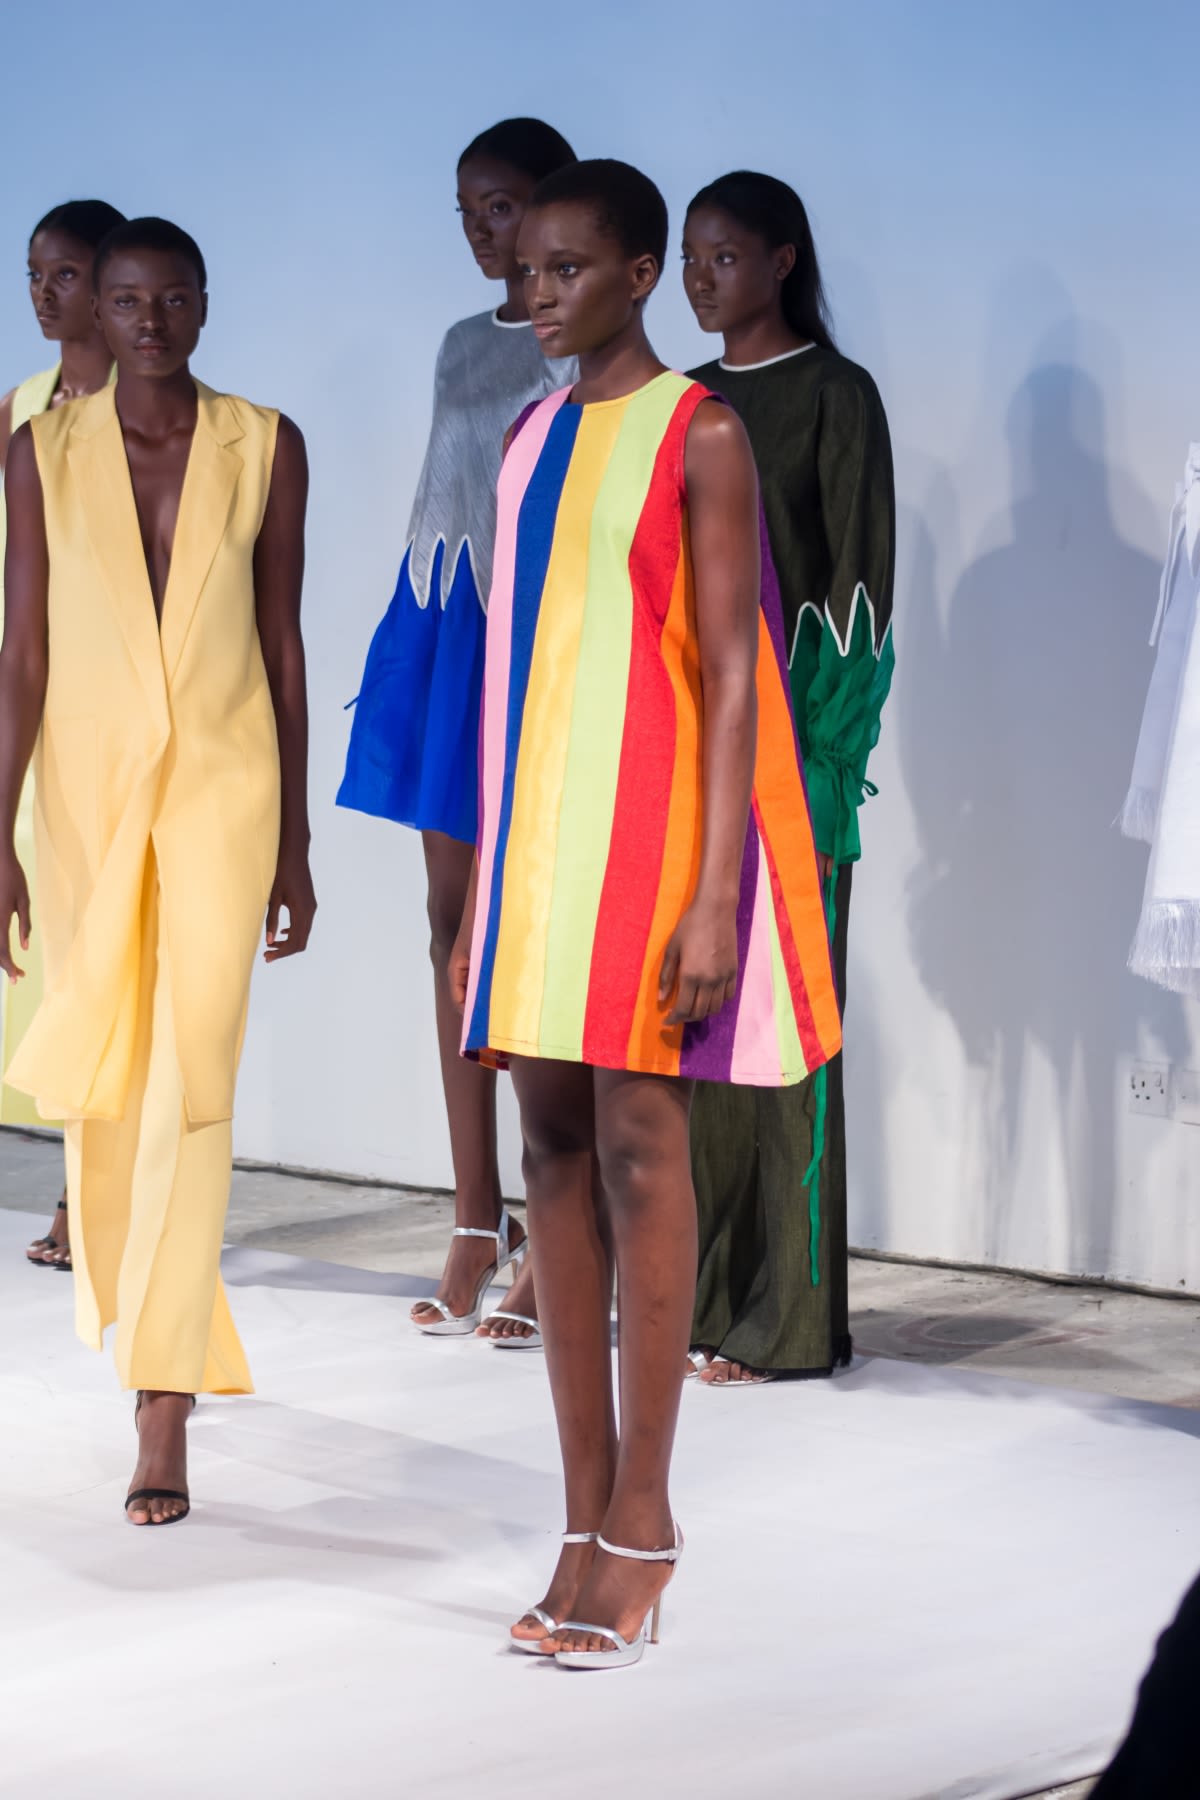 Seal of Approval: Here Are Our Editors' Picks from Lagos Fashion Week A ...